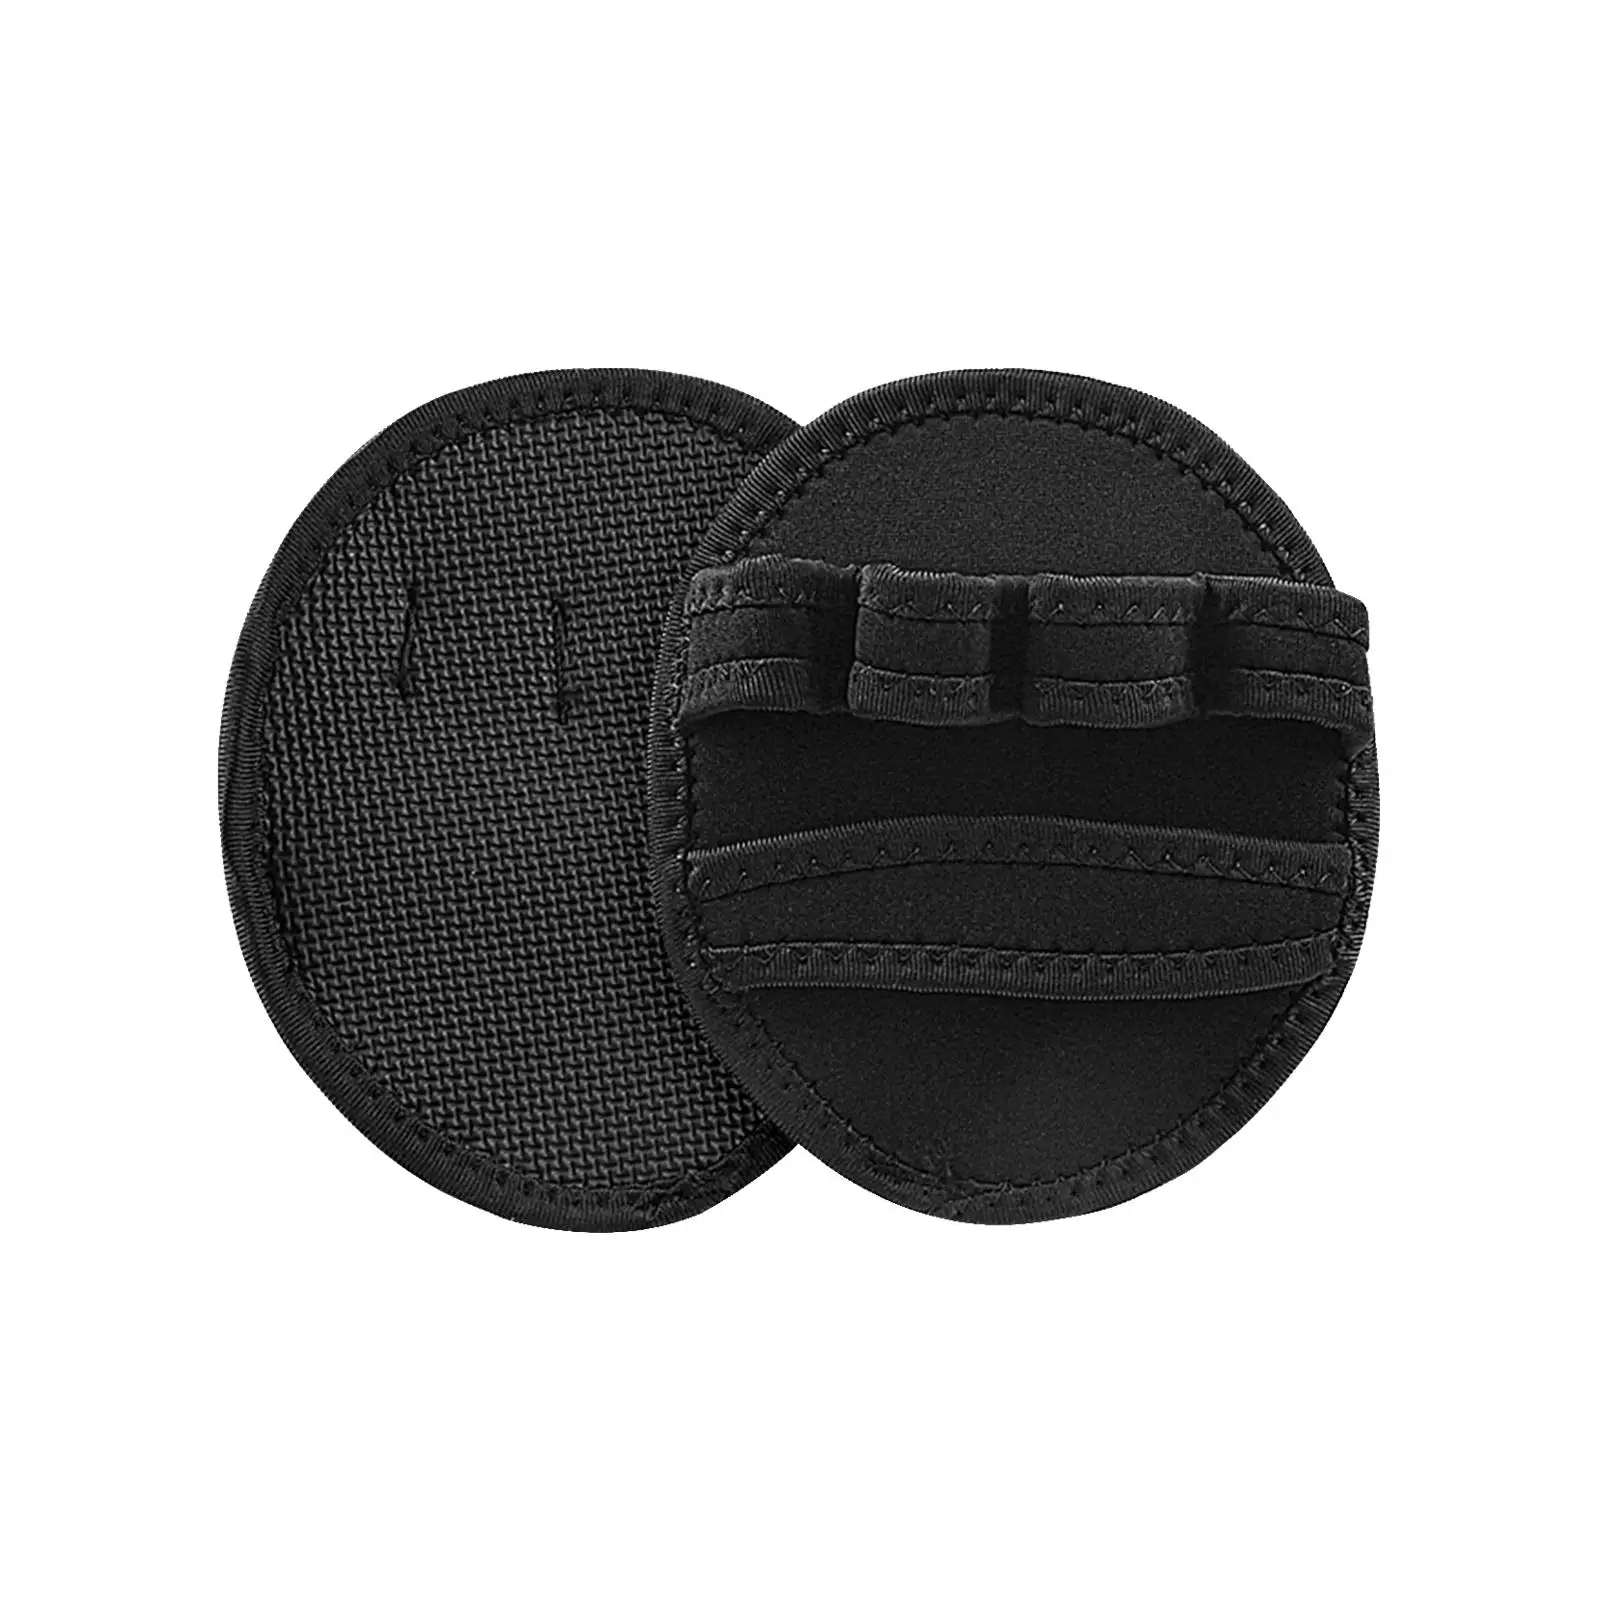 Weight Lifting Grip Pads for Men Unisex Grip Pads for Sports